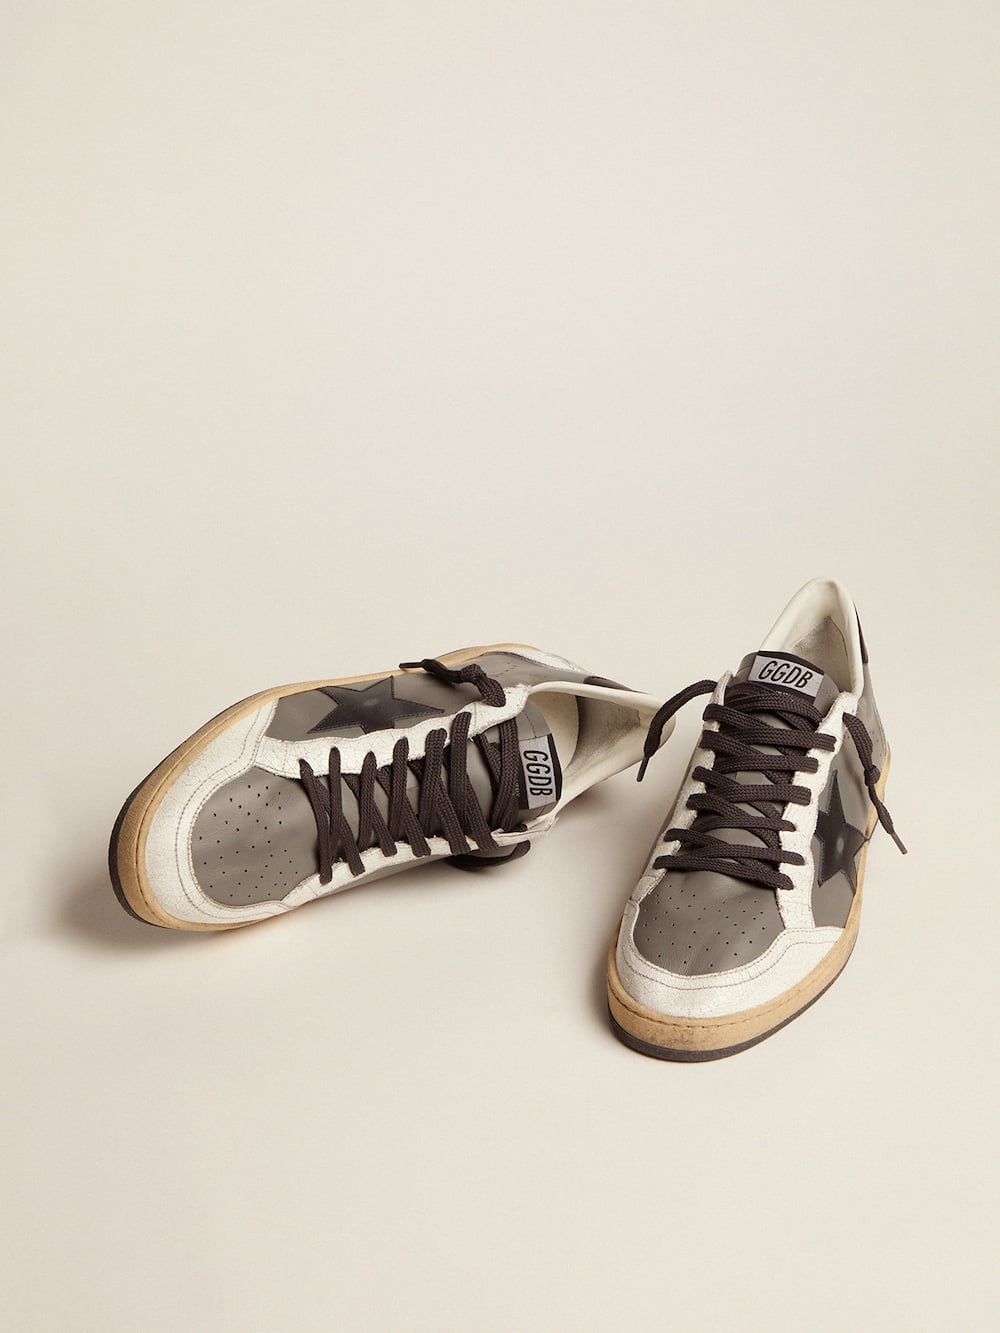 Golden Goose - Men's Ball Star in gray leather with black star and heel tab in 